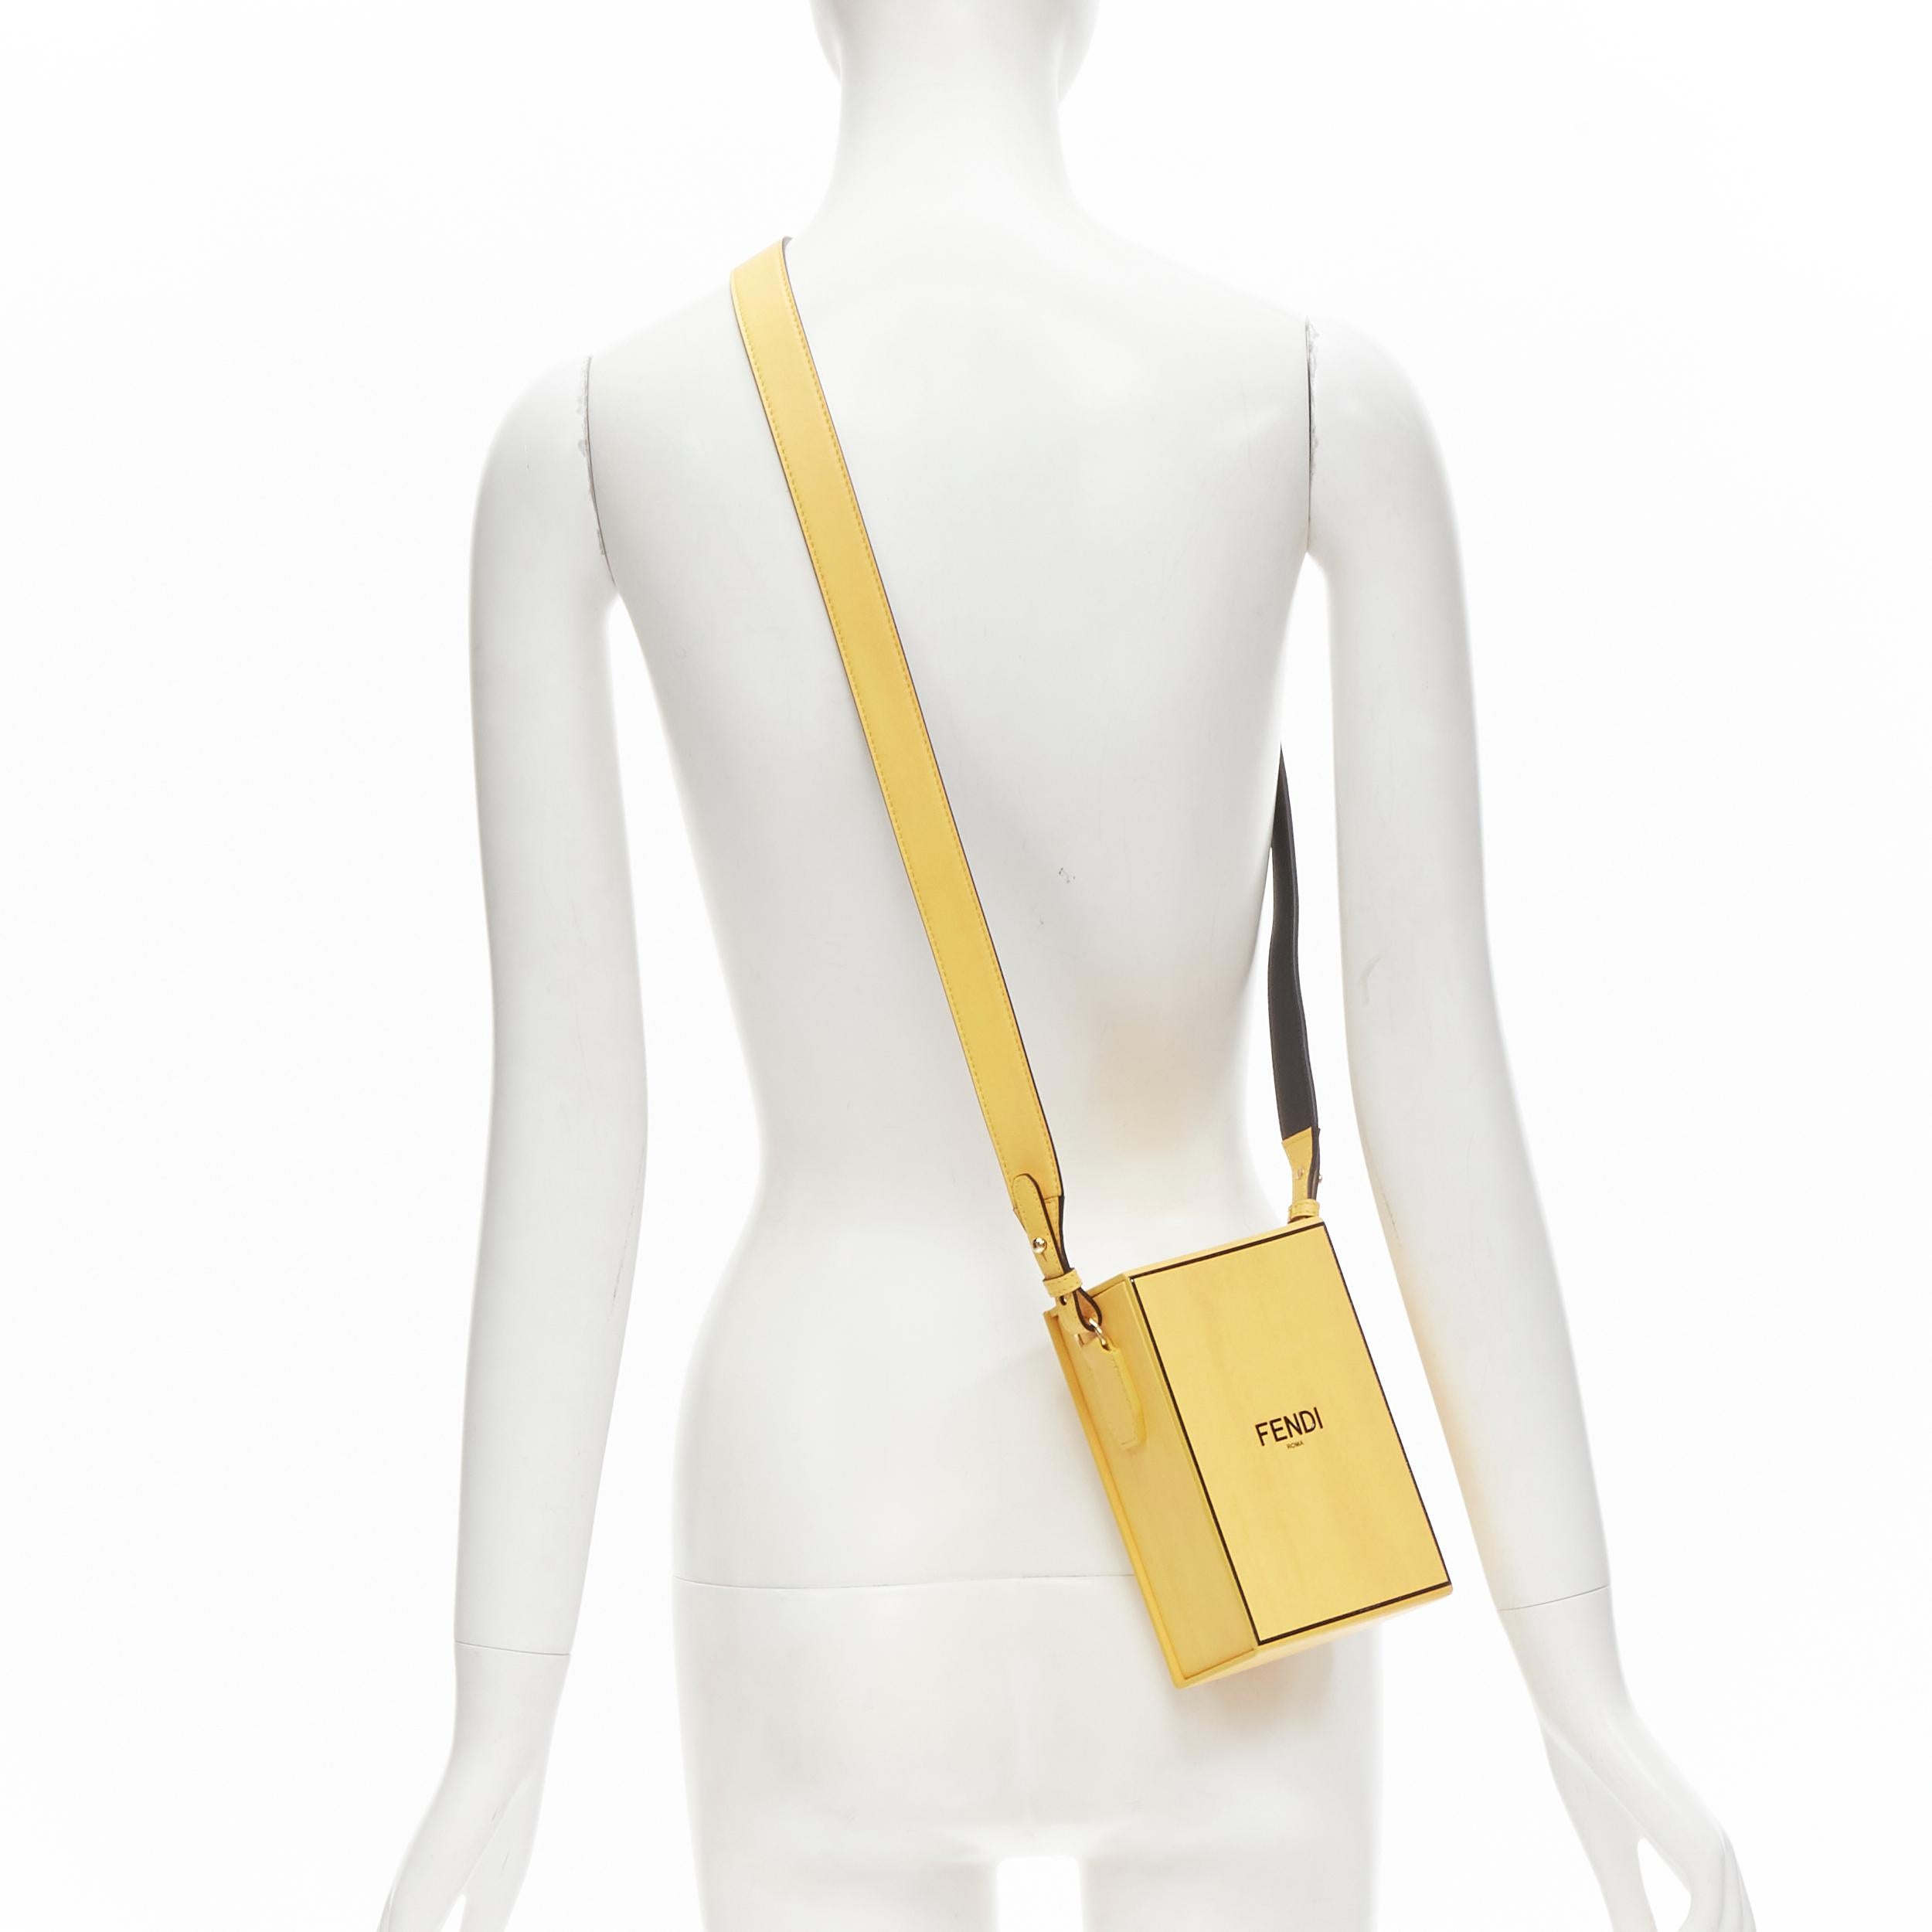 FENDI Vertical Box signature yellow black crossbody structured bag 
Reference: ANWU/A00054 
Brand: Fendi 
Model: Vertical Box 
Collection: 2020 
Material: Leather 
Color: Yellow 
Pattern: Solid 
Closure: Magnet 
Extra Detail: Inspired by a Fendi